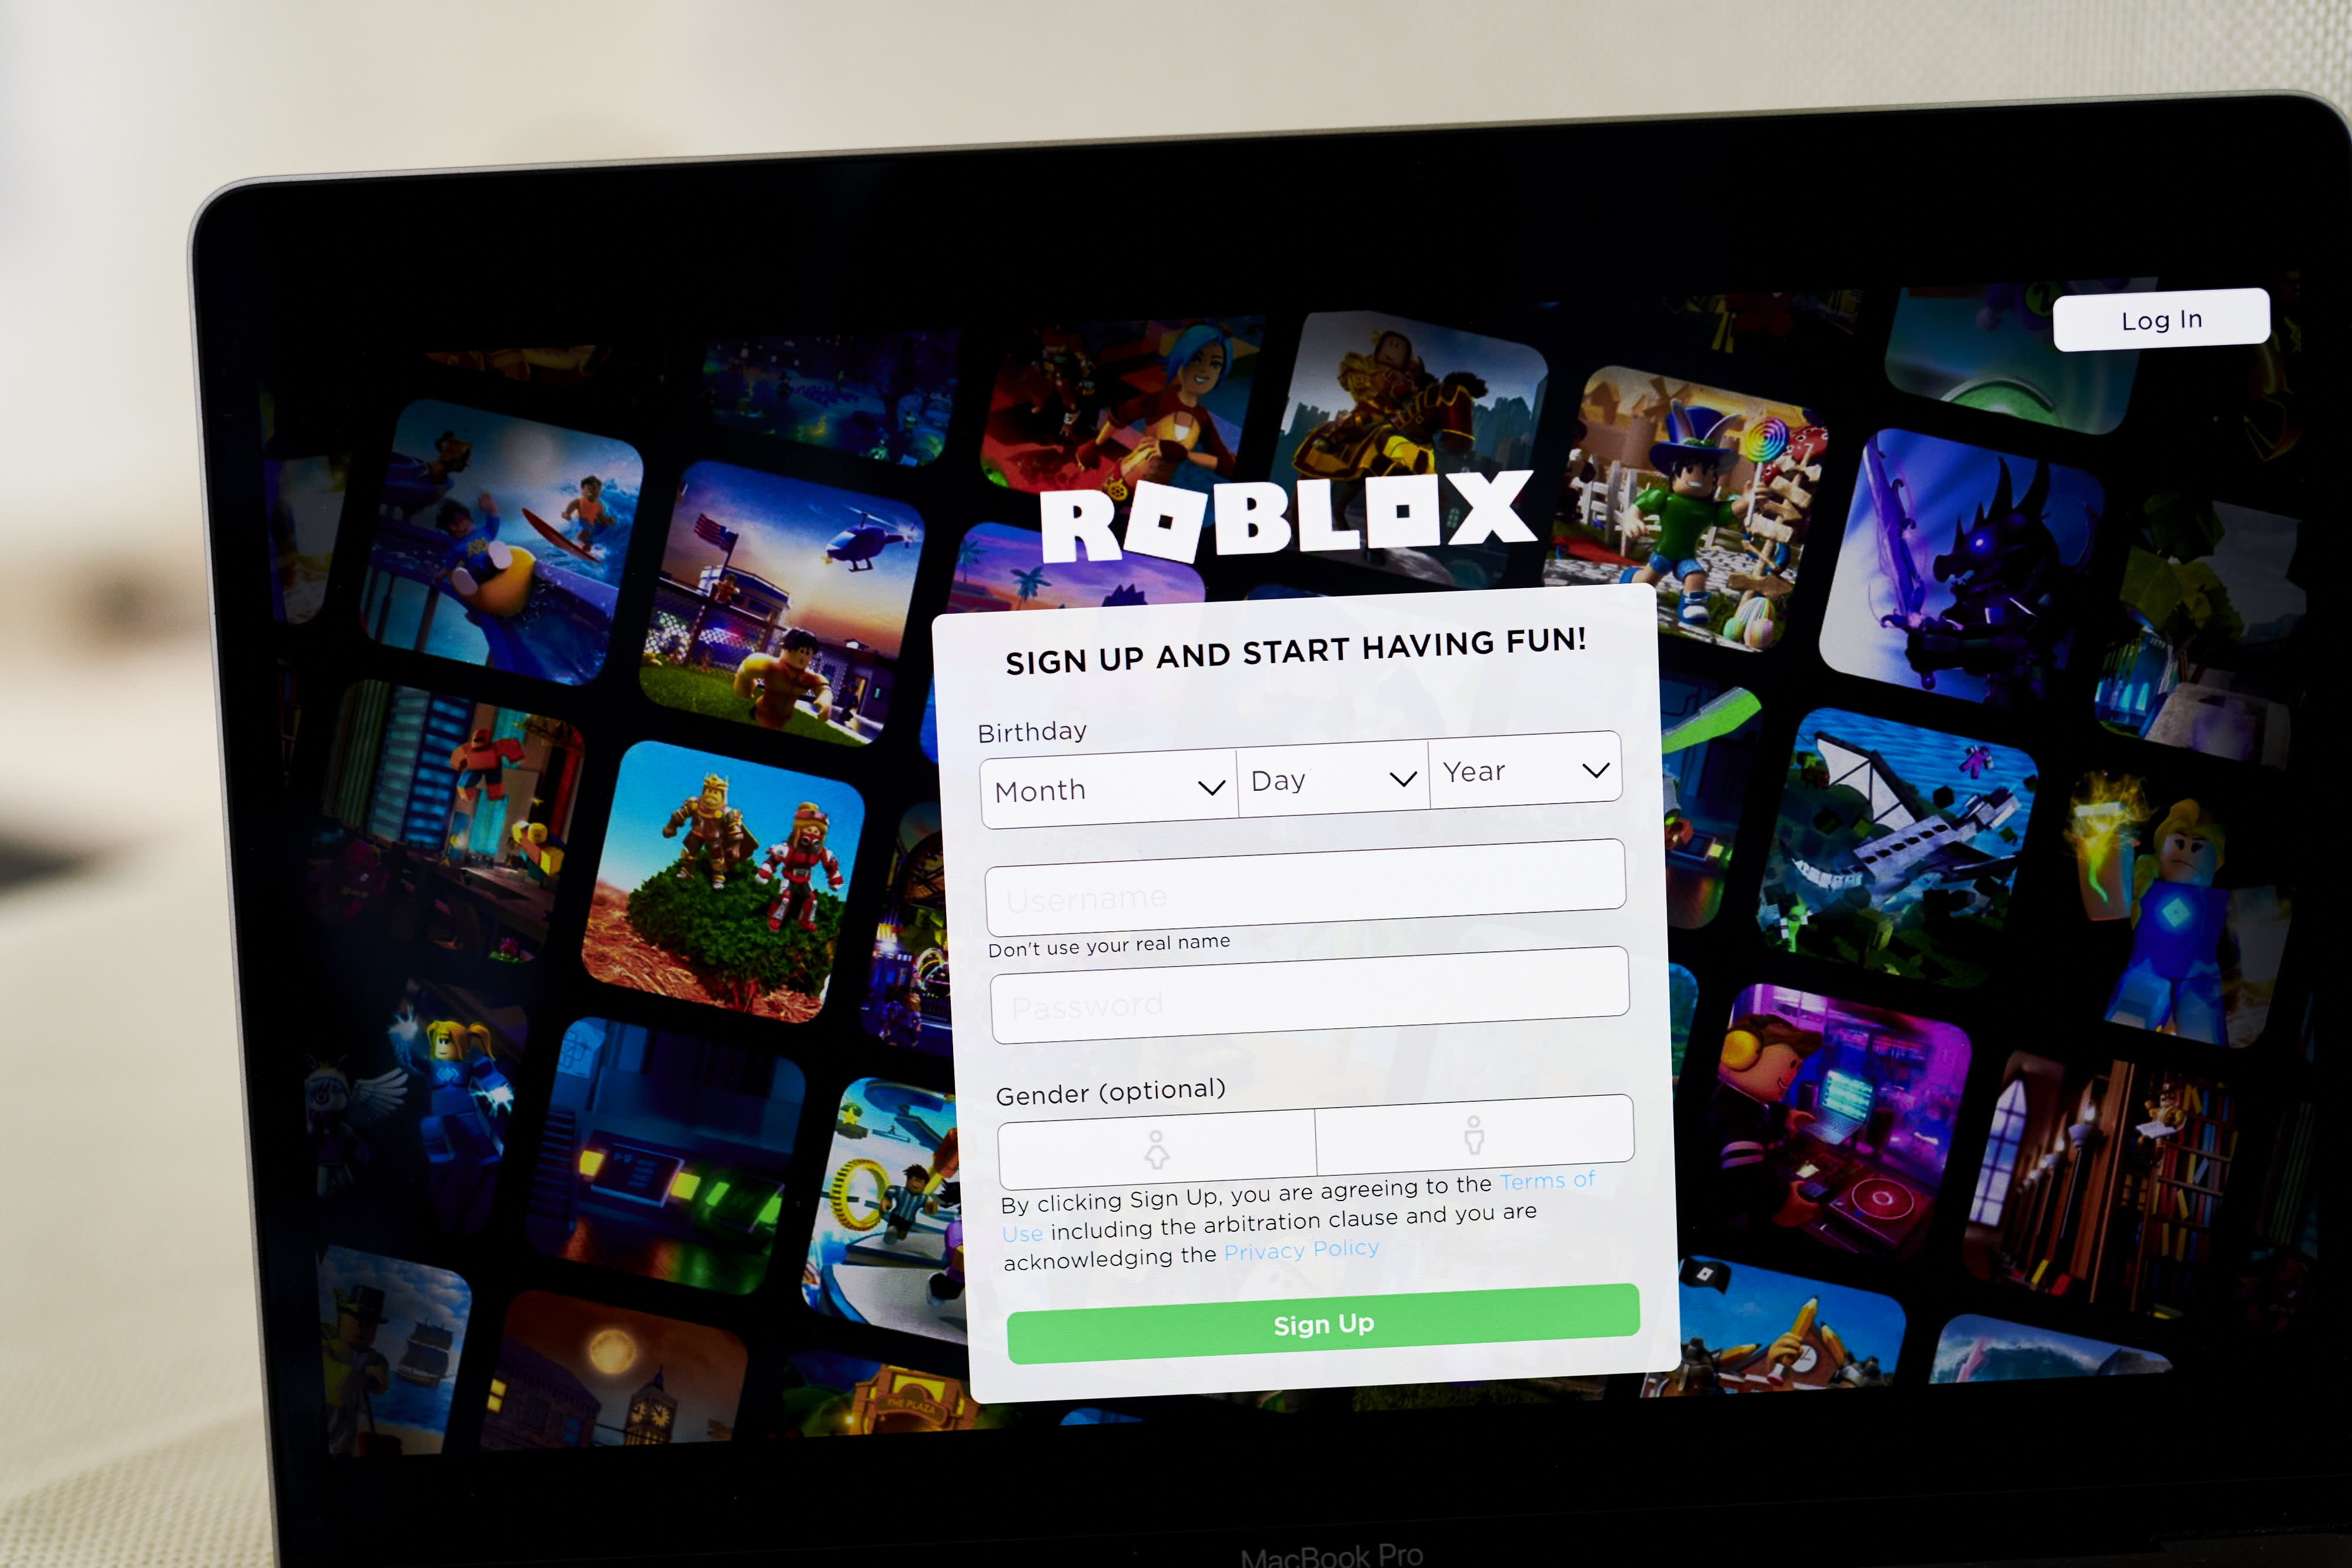 How to Get Robux, Roblox's Main Form of Virtual Currency